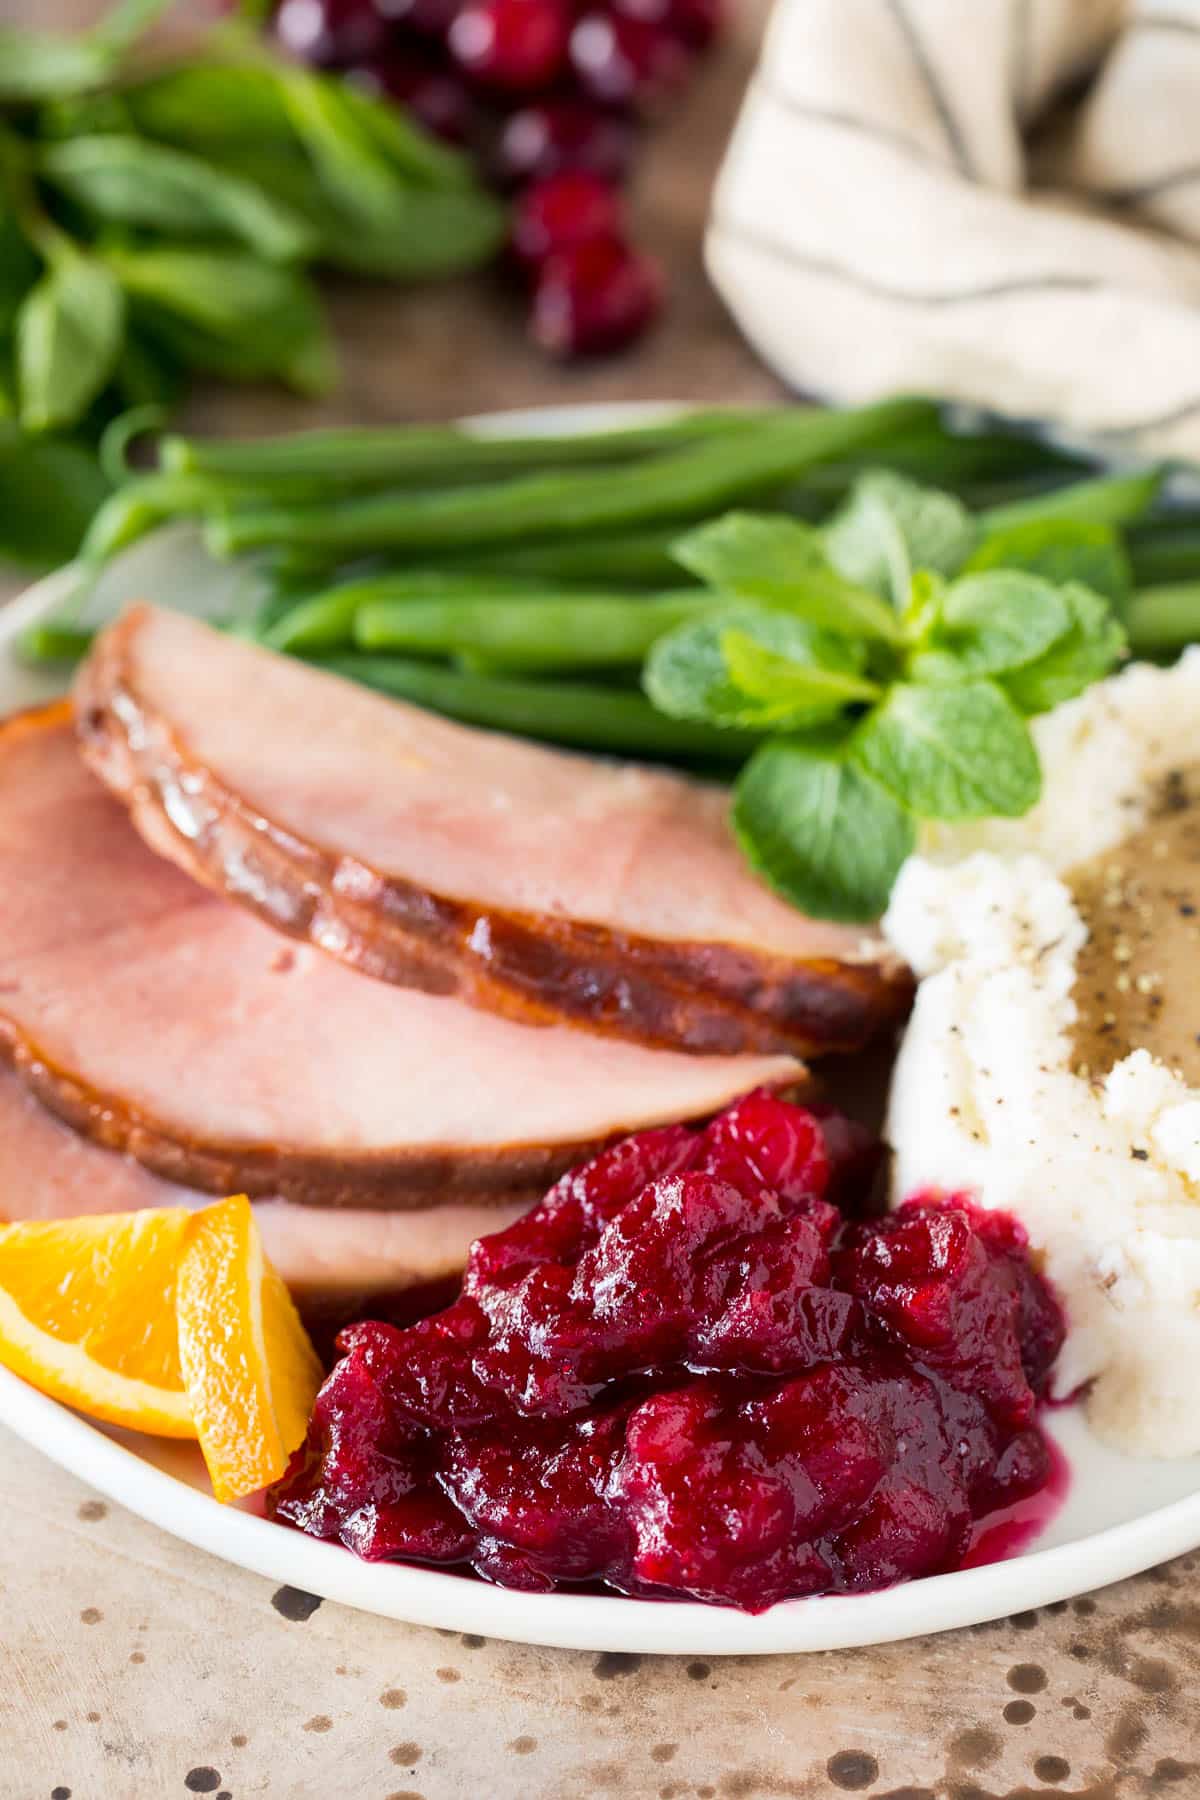 Slow cooker cranberry sauce on a plate with ham and mashed potatoes.